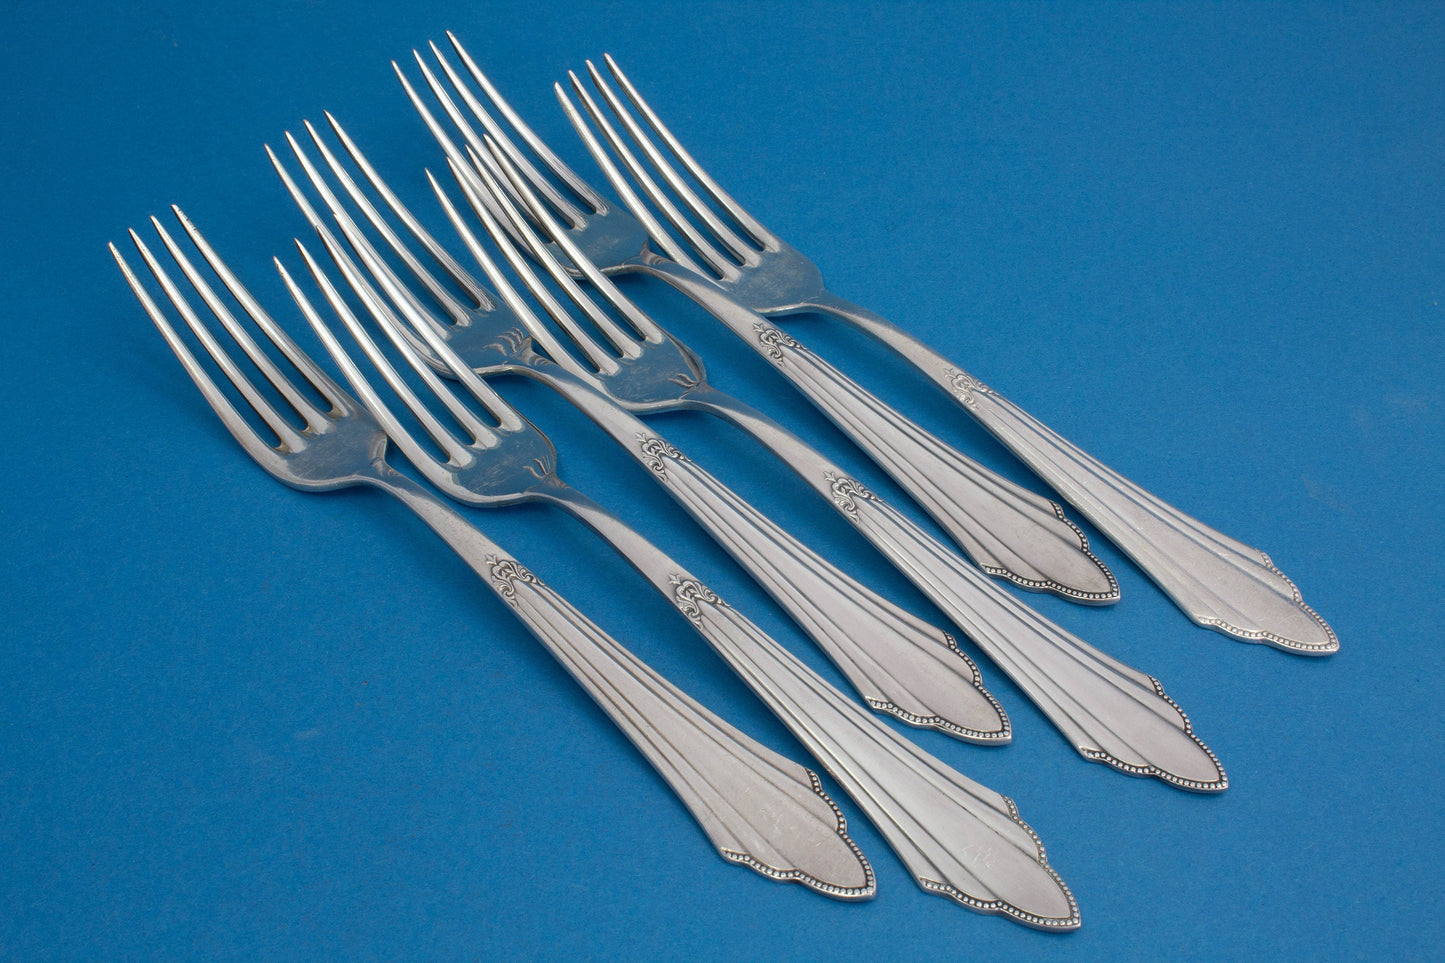 6 table forks from WMF 900, silver-plated forks, fan pattern